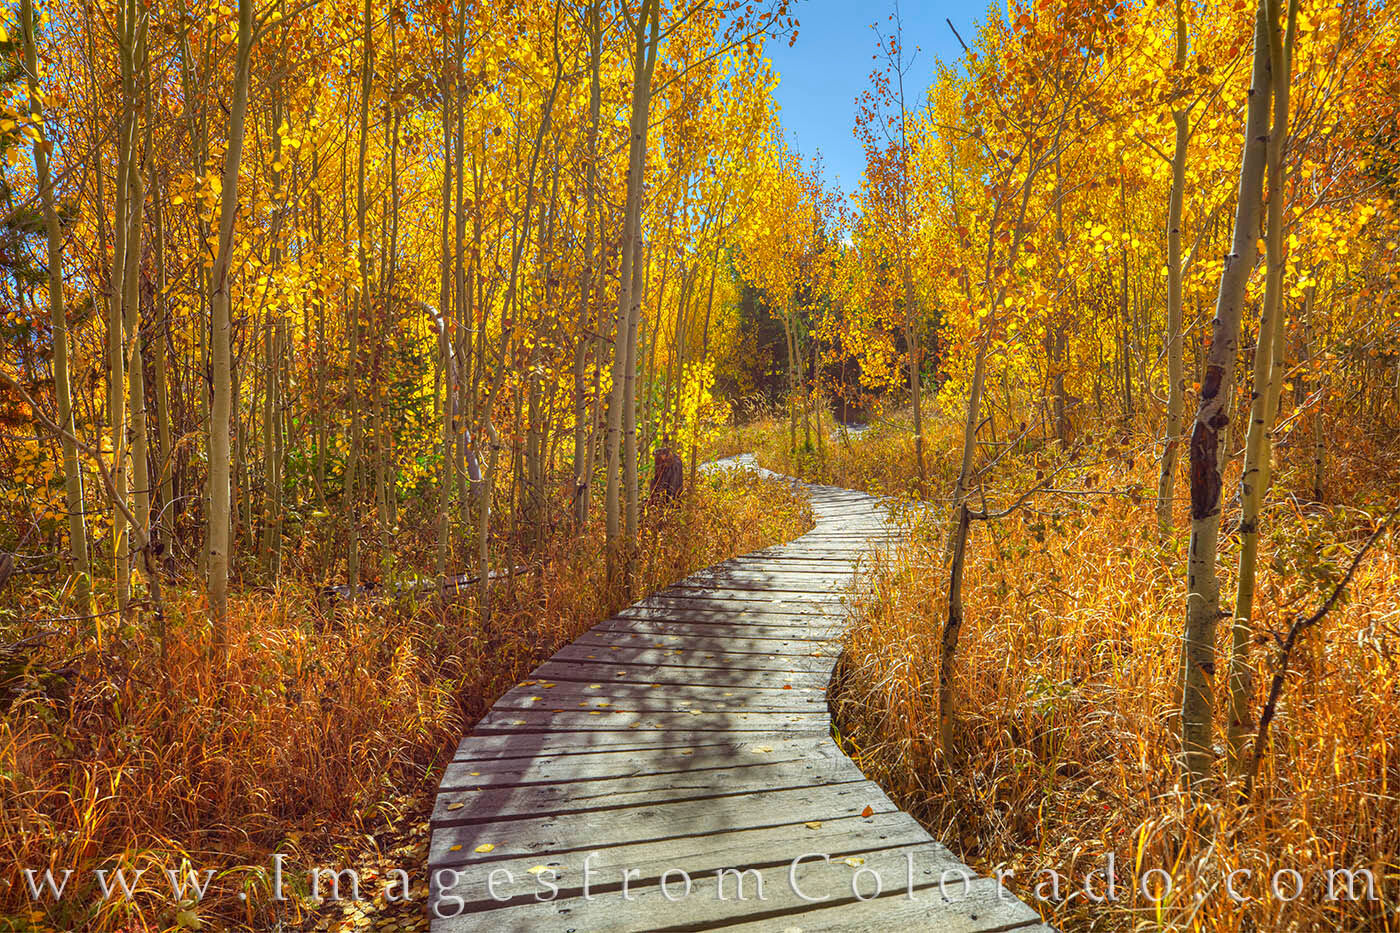 On a beautiful Autumn morning, the colors of aspen and underbrush seem to glow in the early light of a cold September day. Winter...